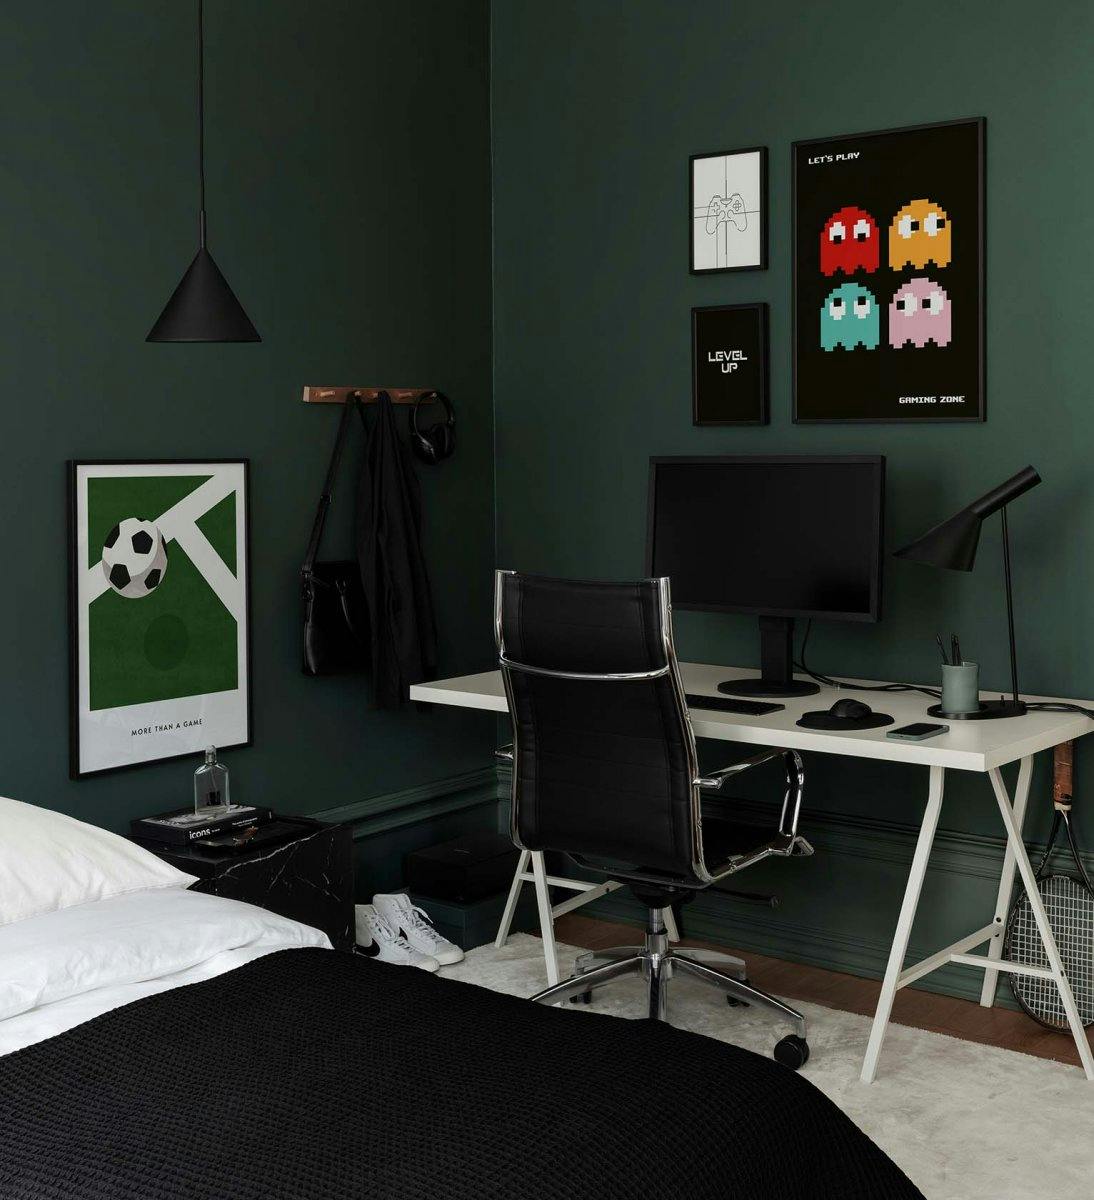 Gallery wall for the teenager with sports and games prints with black wood frames